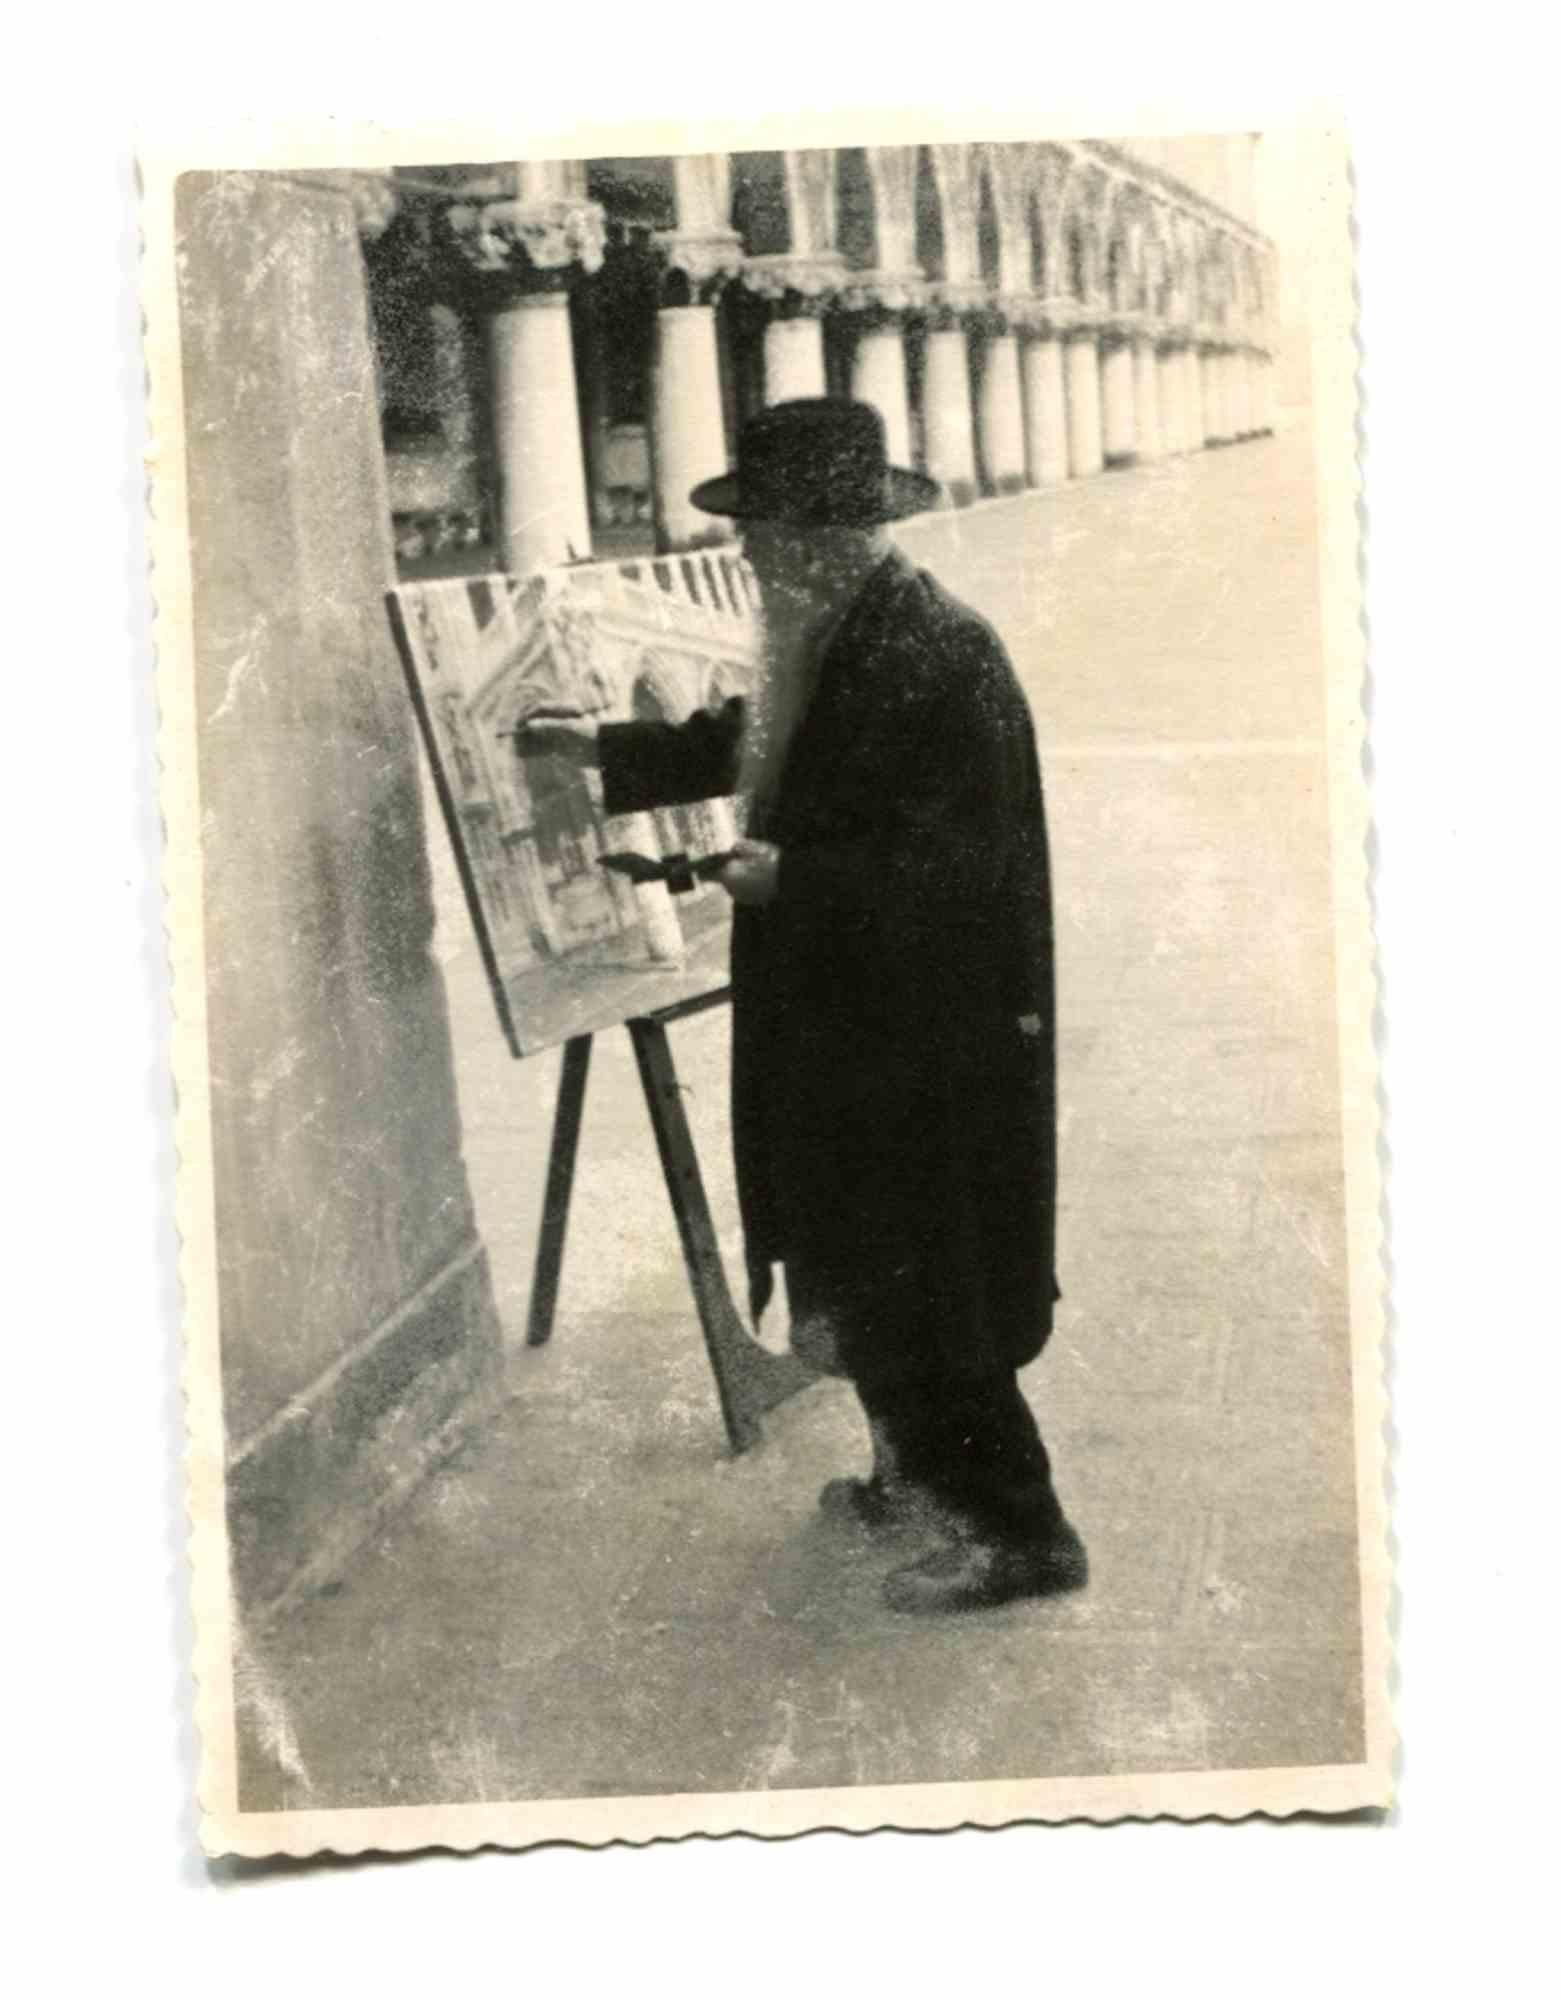 Unknown Figurative Photograph - Old Days - Painting in San Marco Venice - Vintage Photo - Early 20th Century